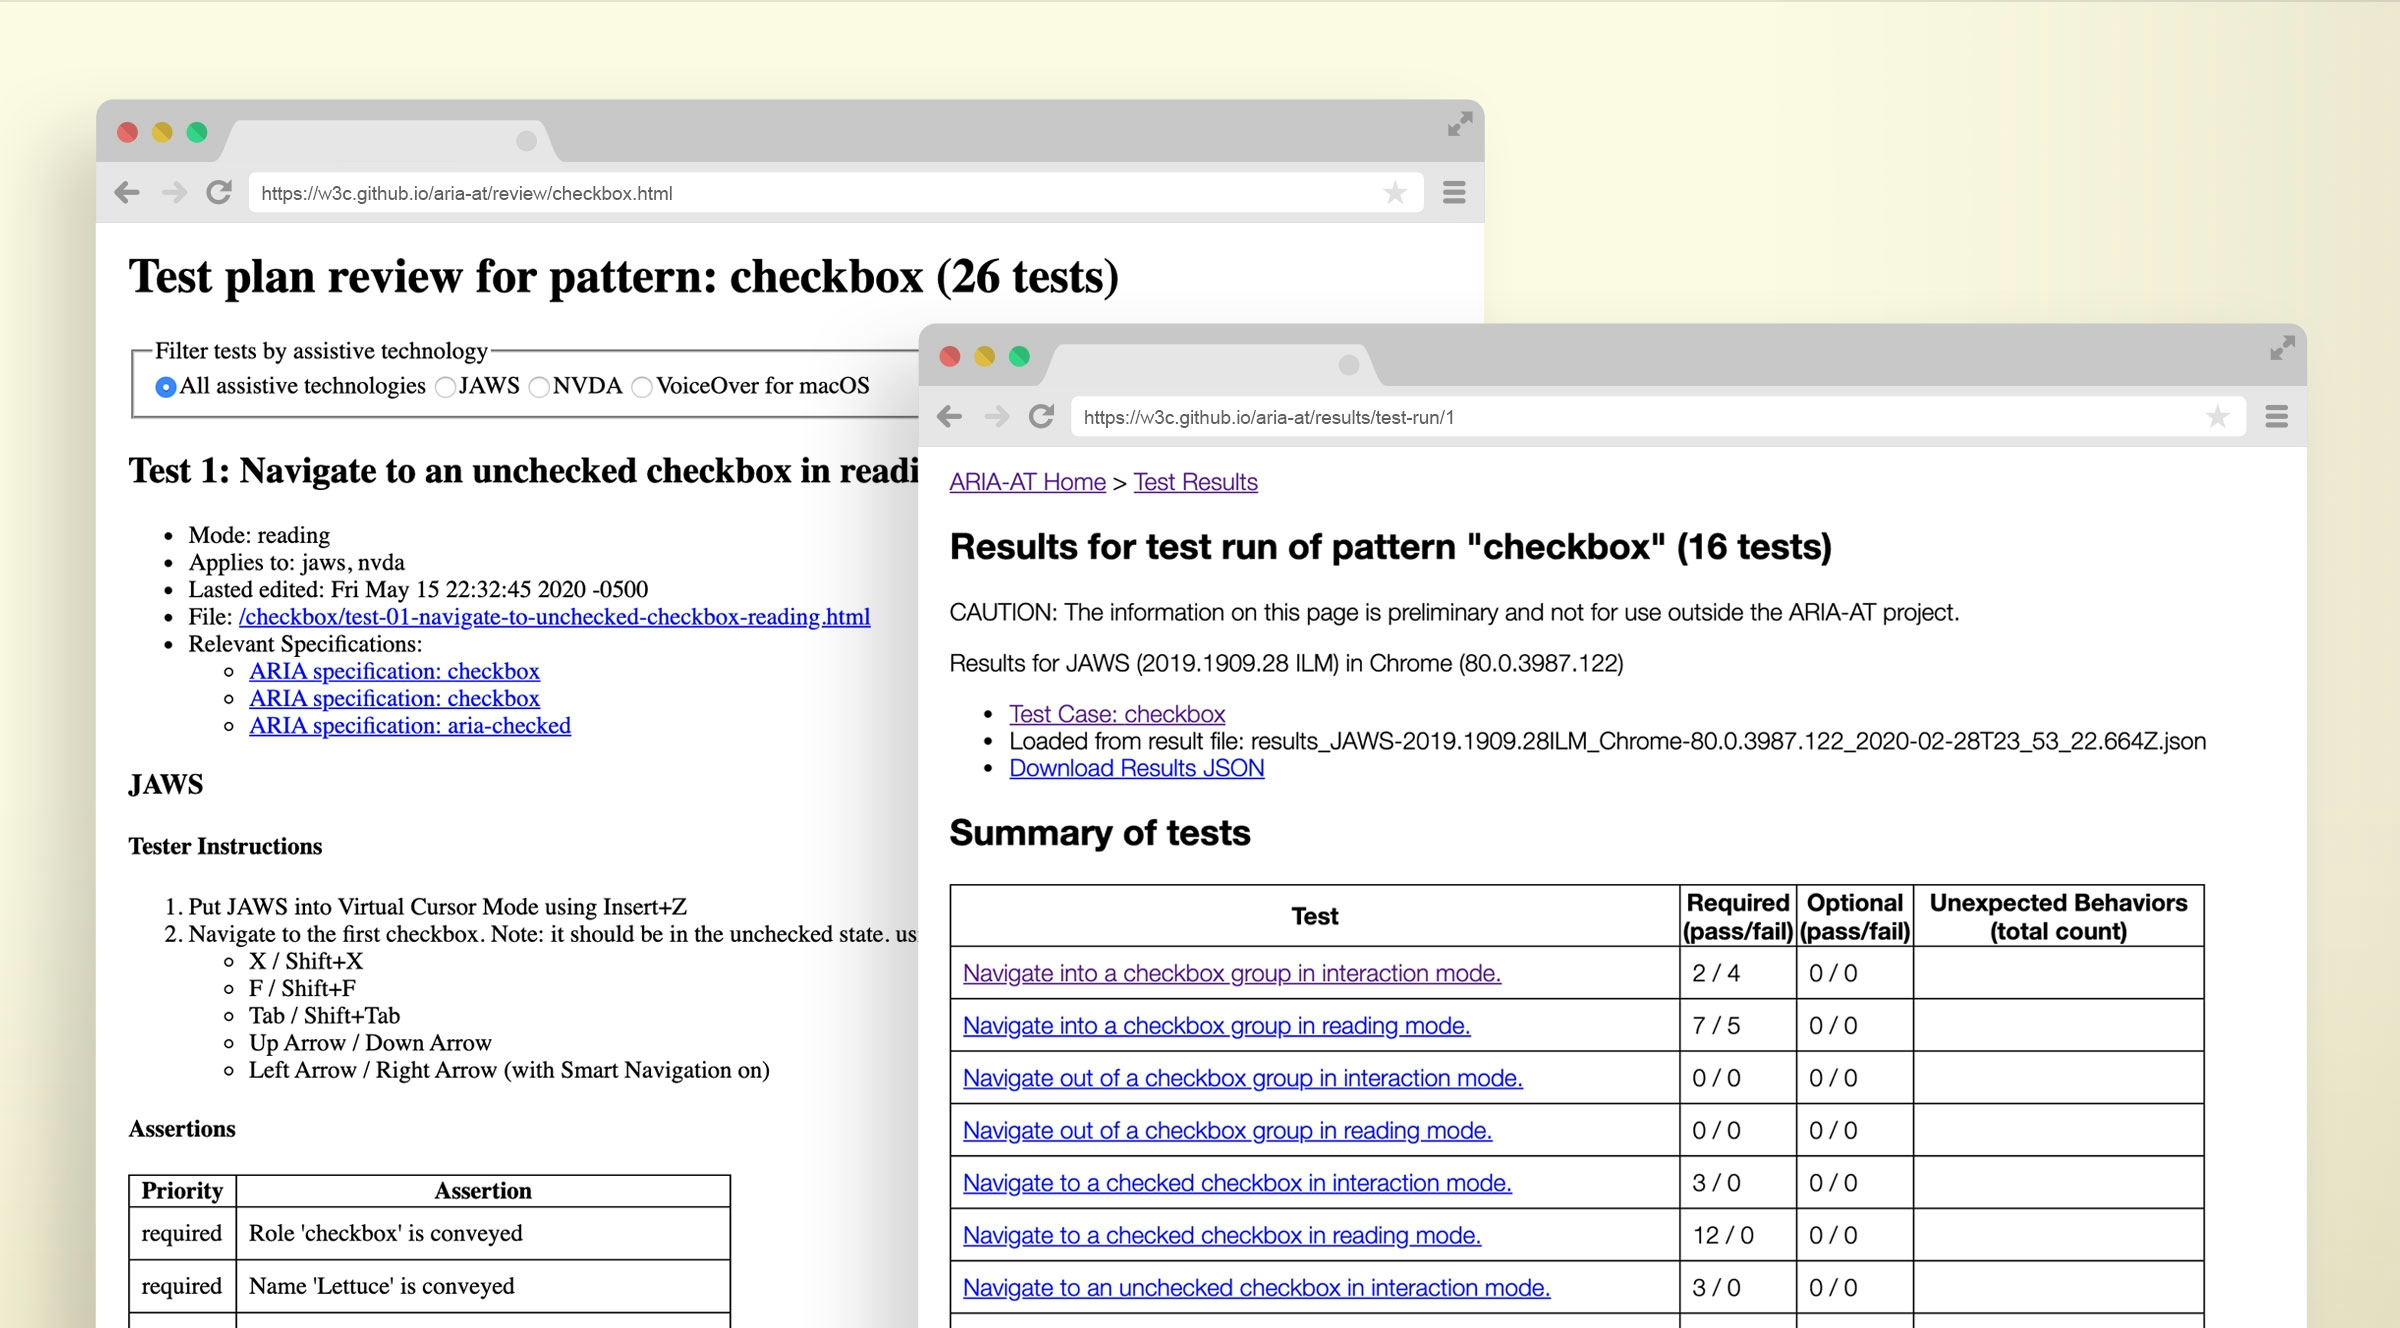 Two layered screenshots of the Aria-AT prototype, each in its own illustrated browser window. The first is of a test plan for checkbox. The second is of test run results for the checkbox pattern.